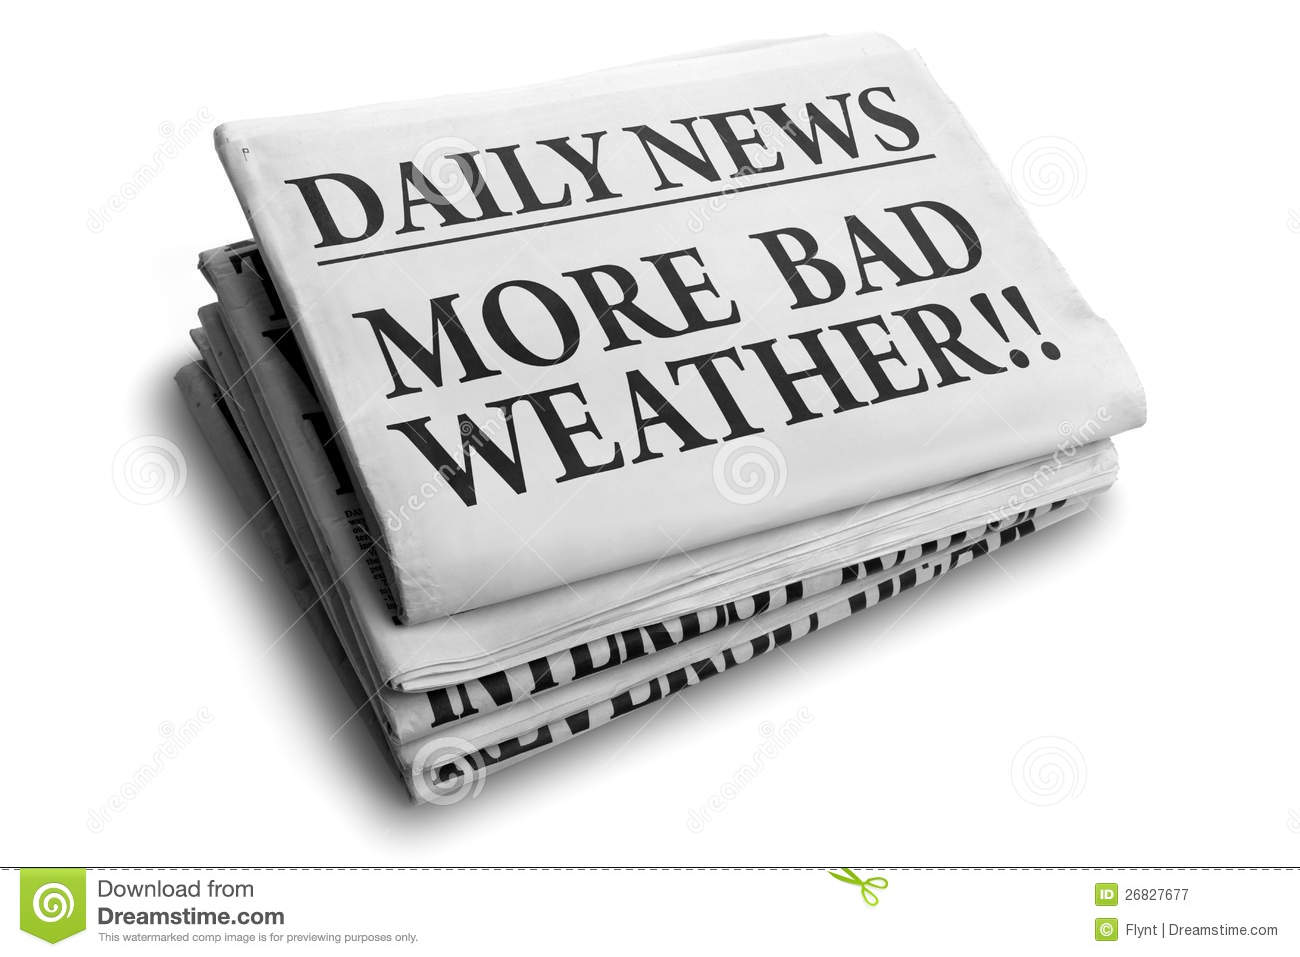 Free Stock Photography  More Bad Weather Daily Newspaper Headline